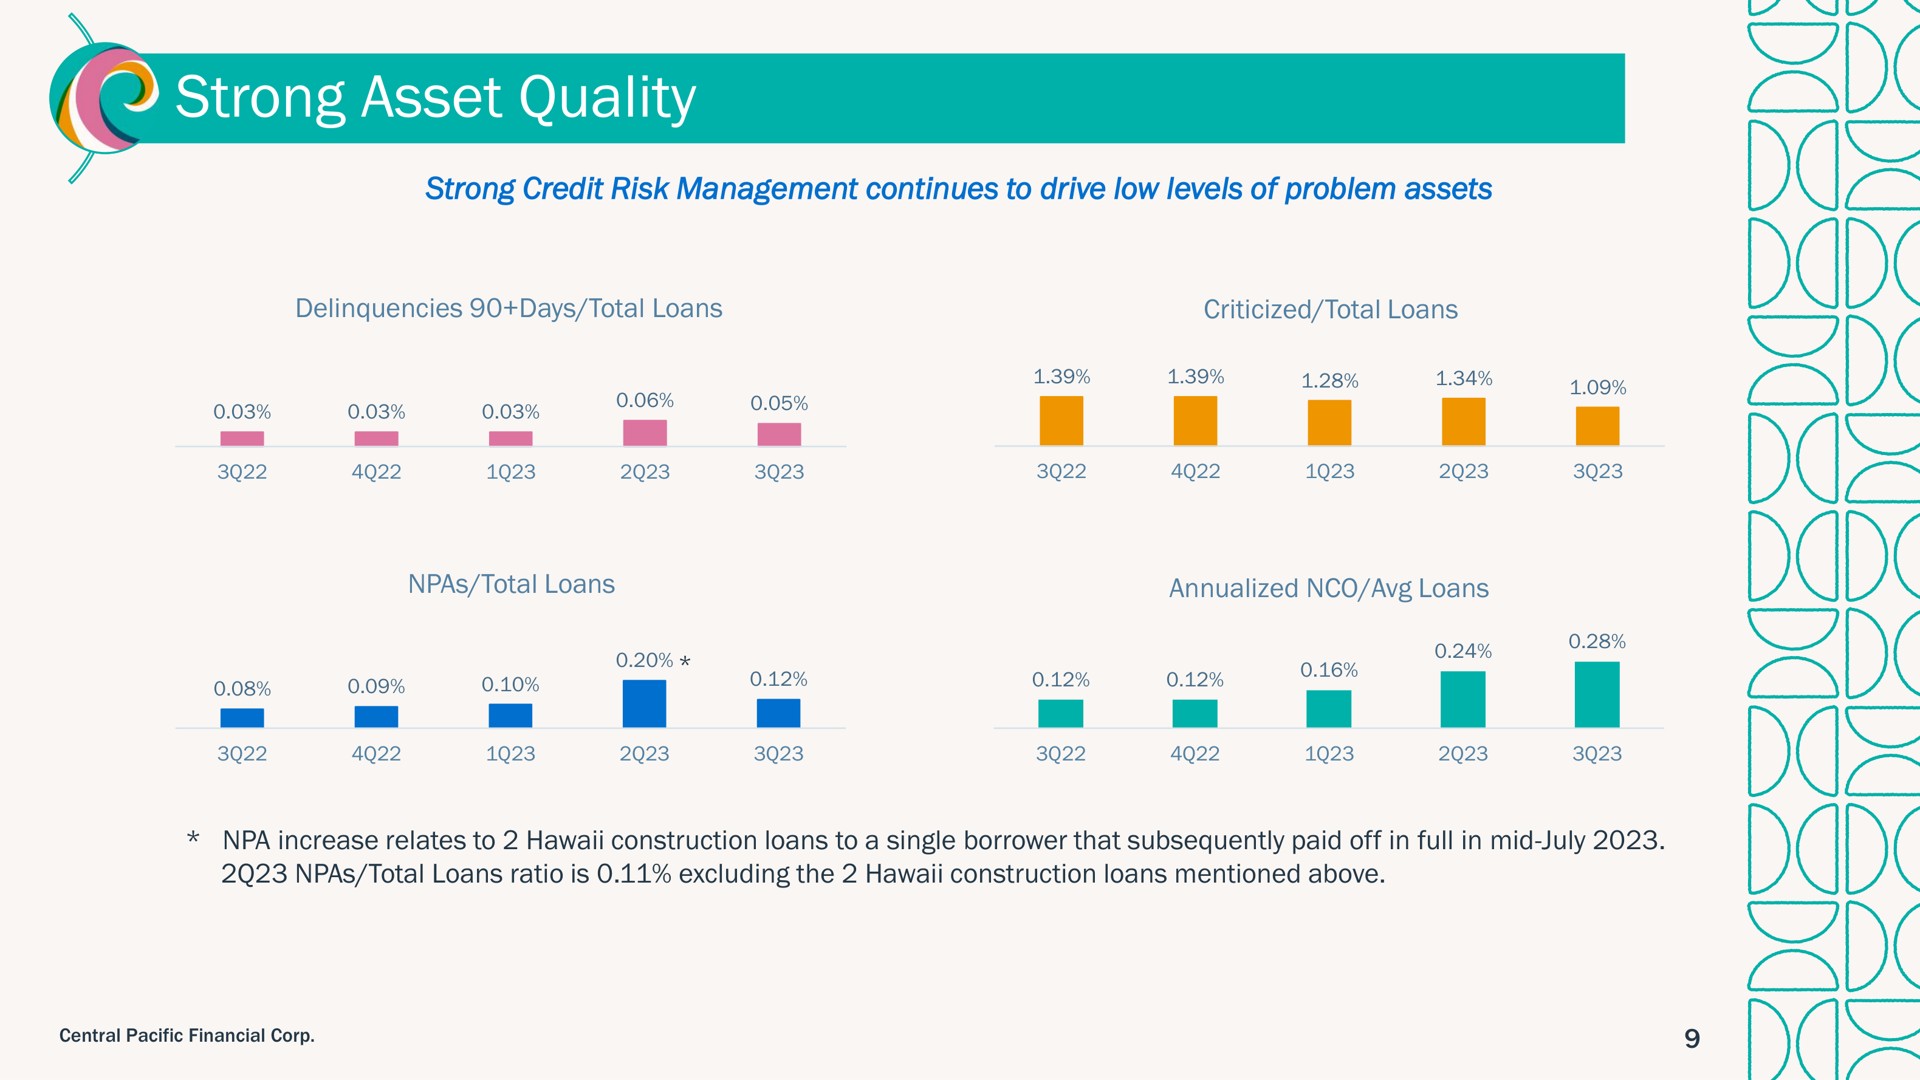 strong asset quality | Central Pacific Financial